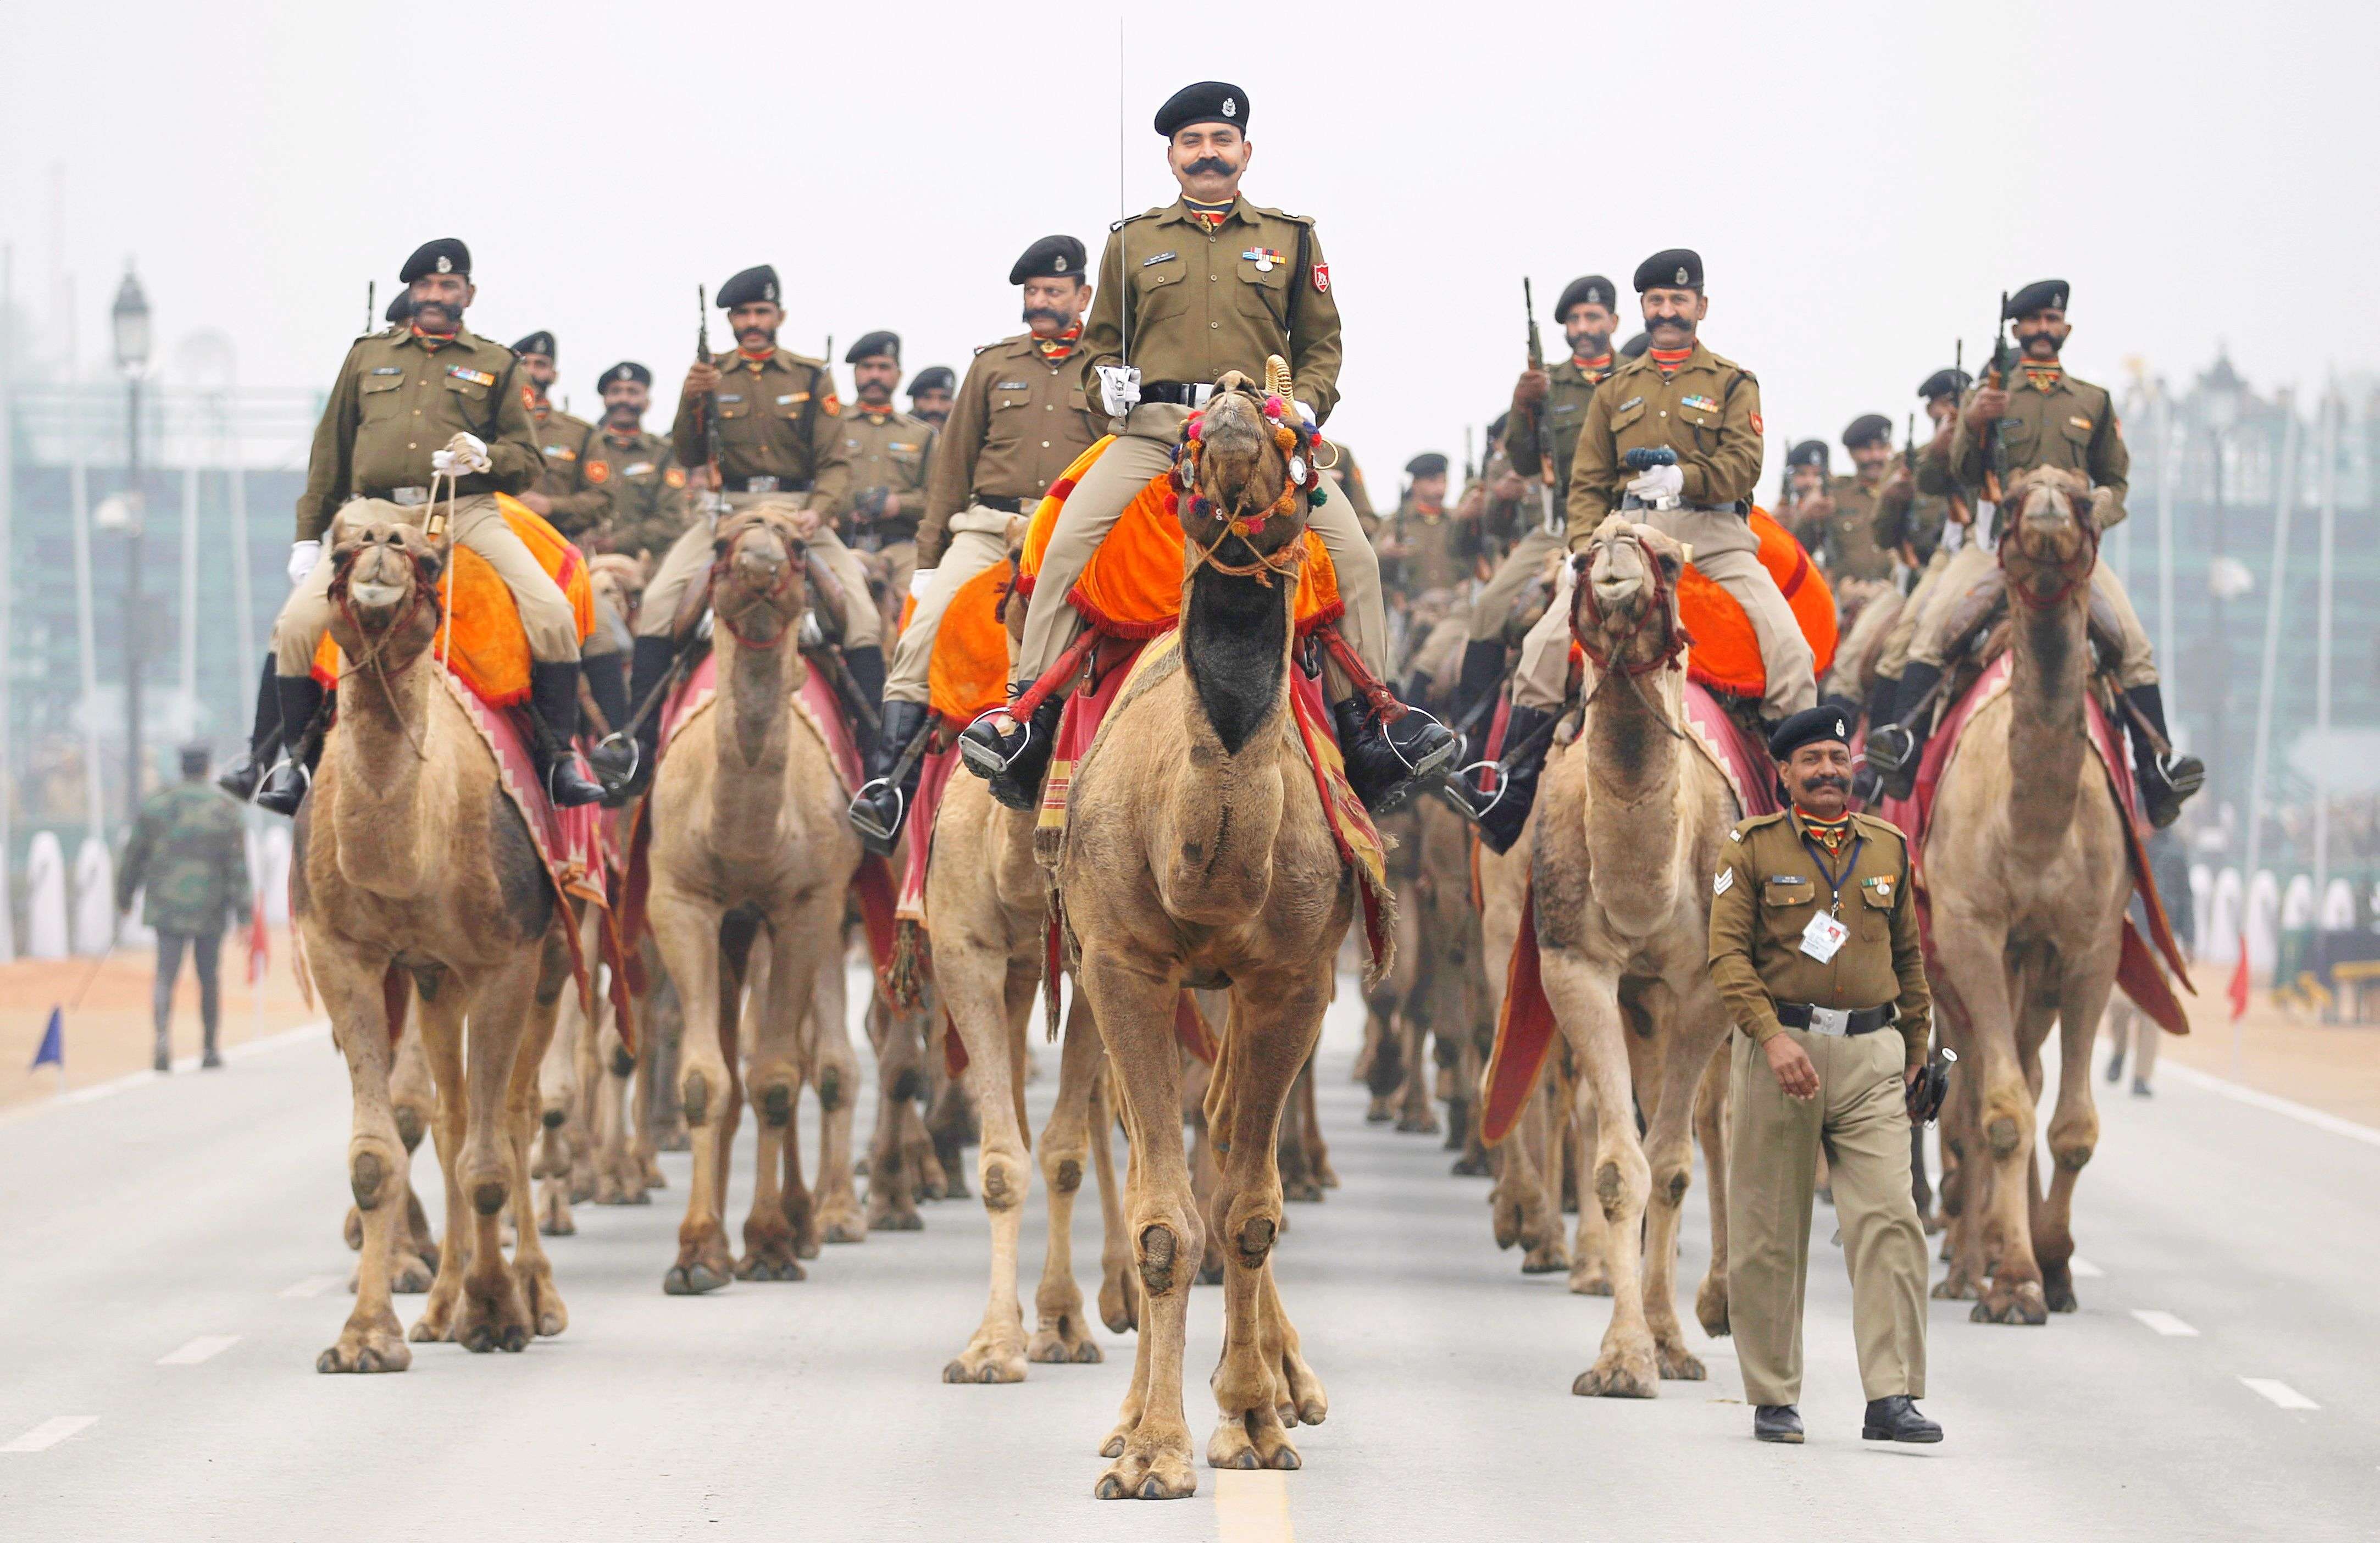 Camel mounted Border Security Force soldiers ride during rehearsals for the upcoming Republic Day parade in New Delhi. (AP Photo/AltafC Qadri)